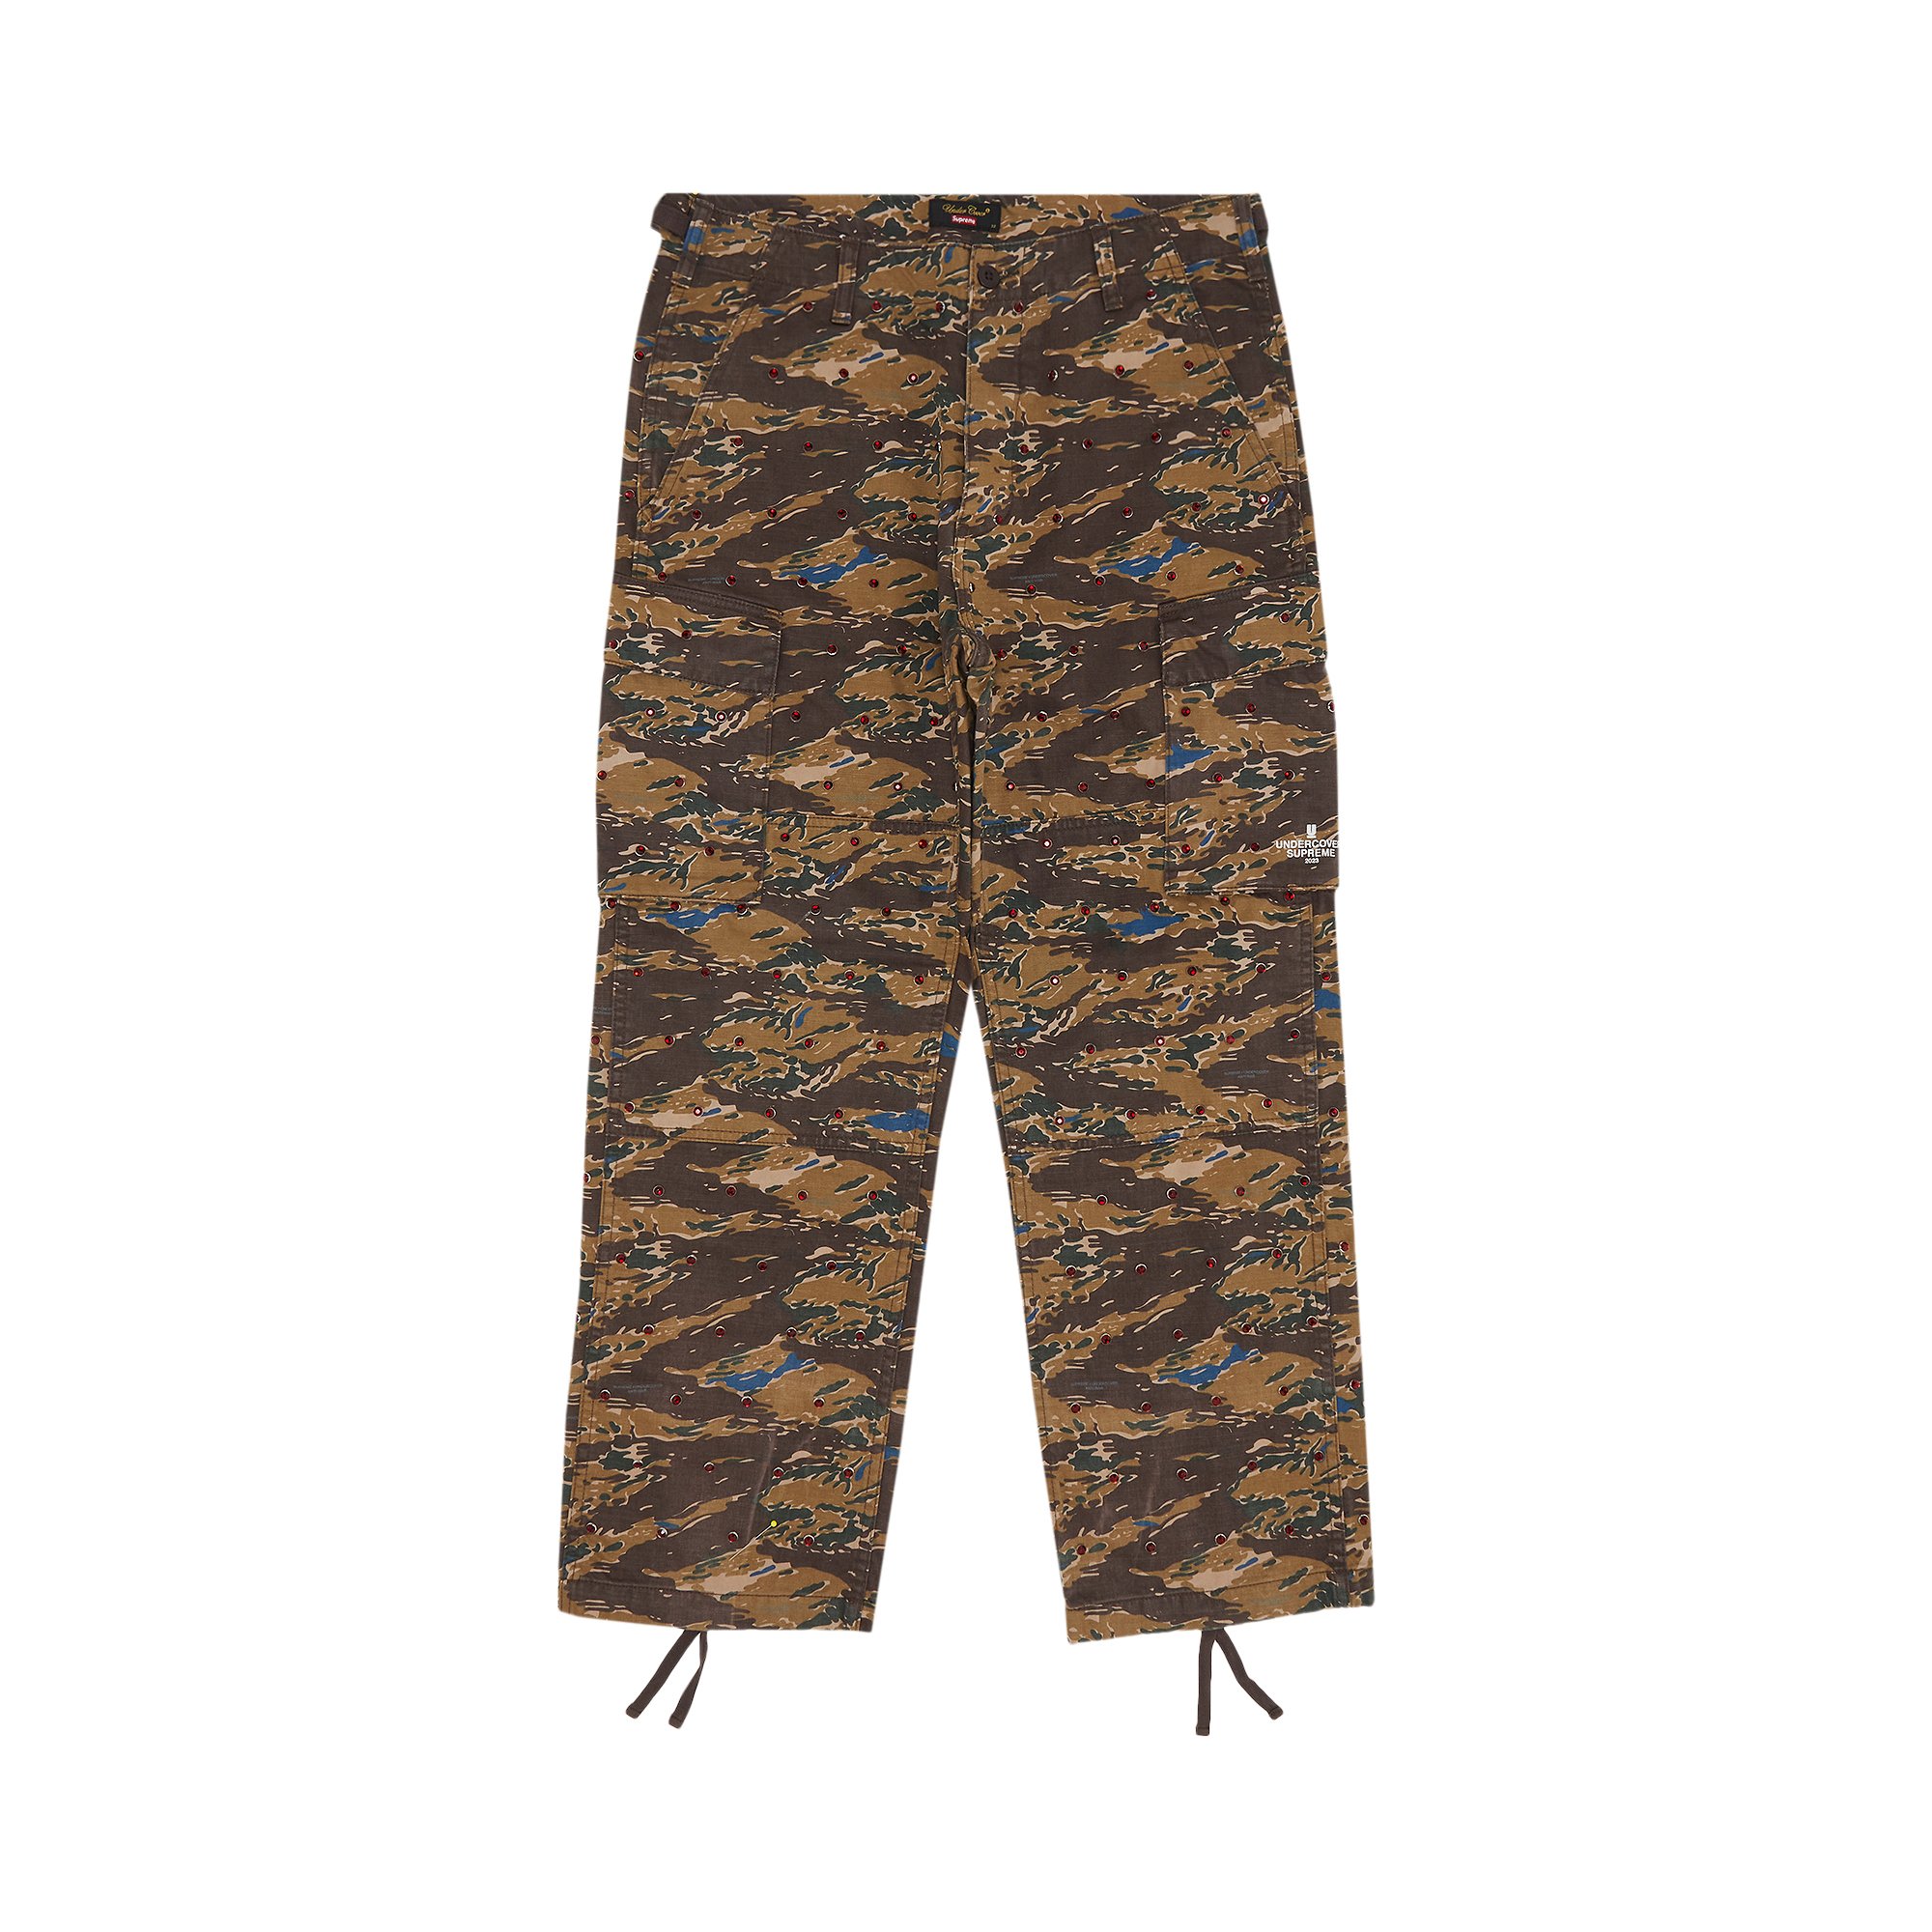 Supreme x UNDERCOVER Studded Cargo Pant 'Brown'